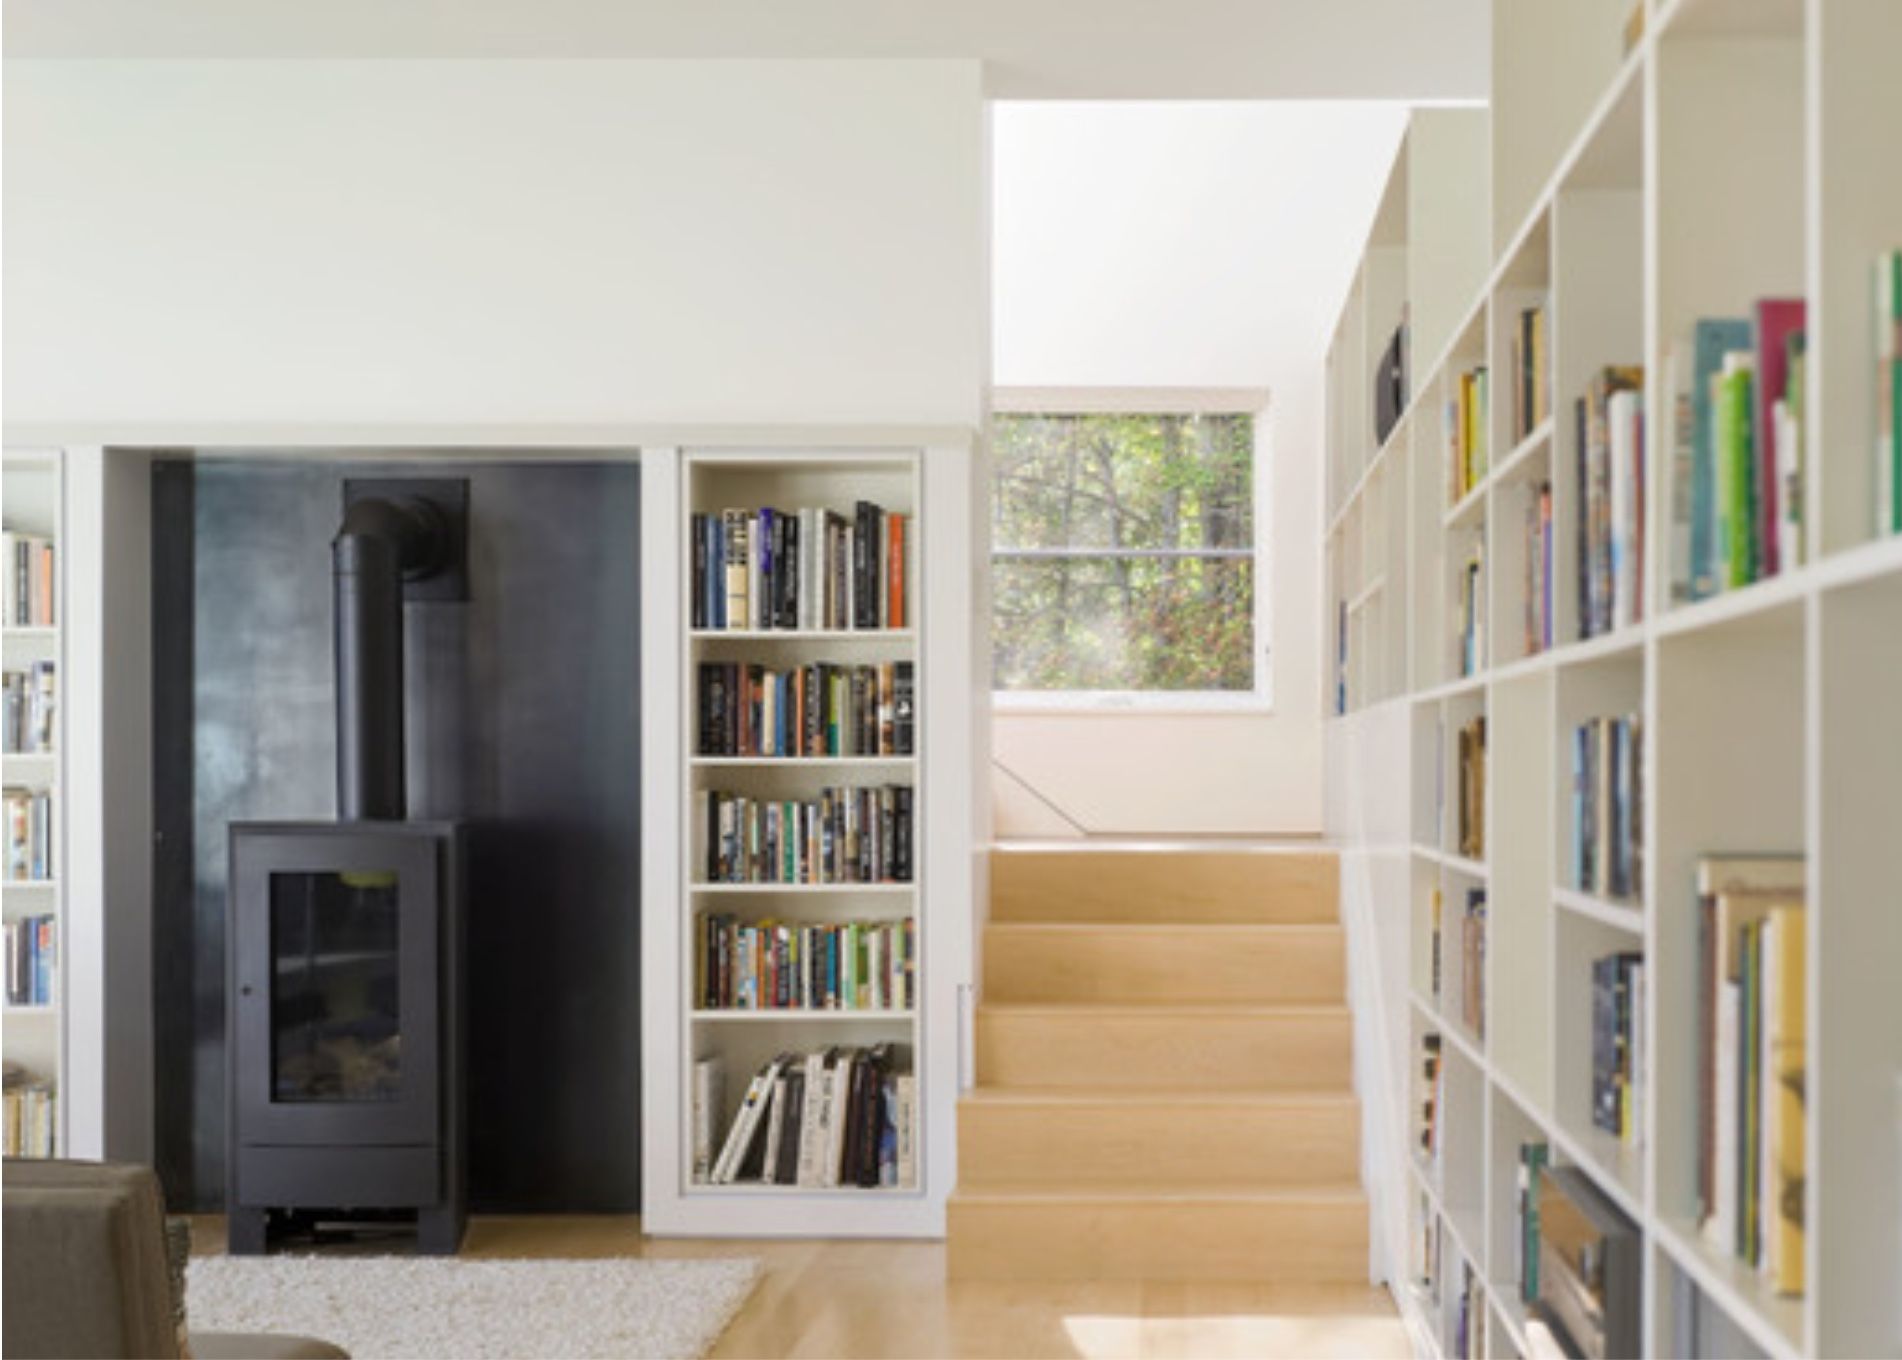 Fireplace with Bookshelves On Each Side Fresh Wood Stove with Built In Shelves Home Wood Stove